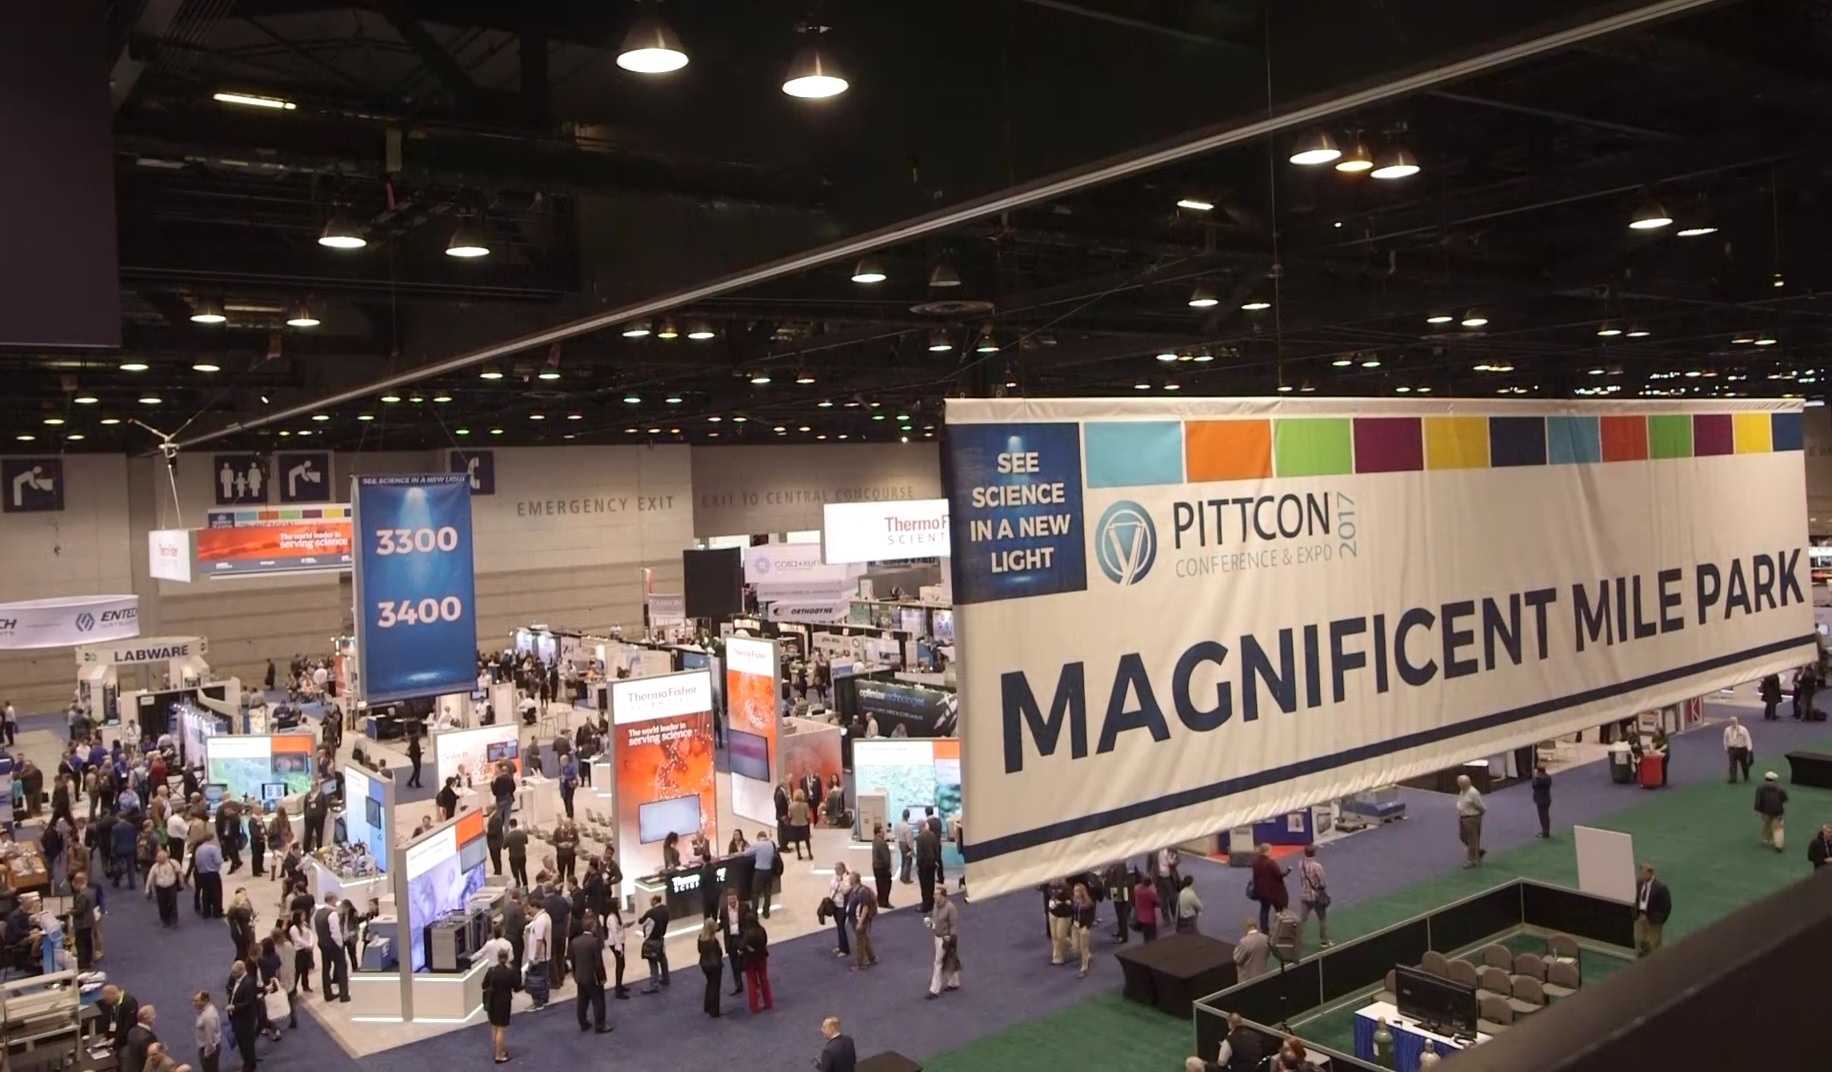 Why Attend Pittcon?